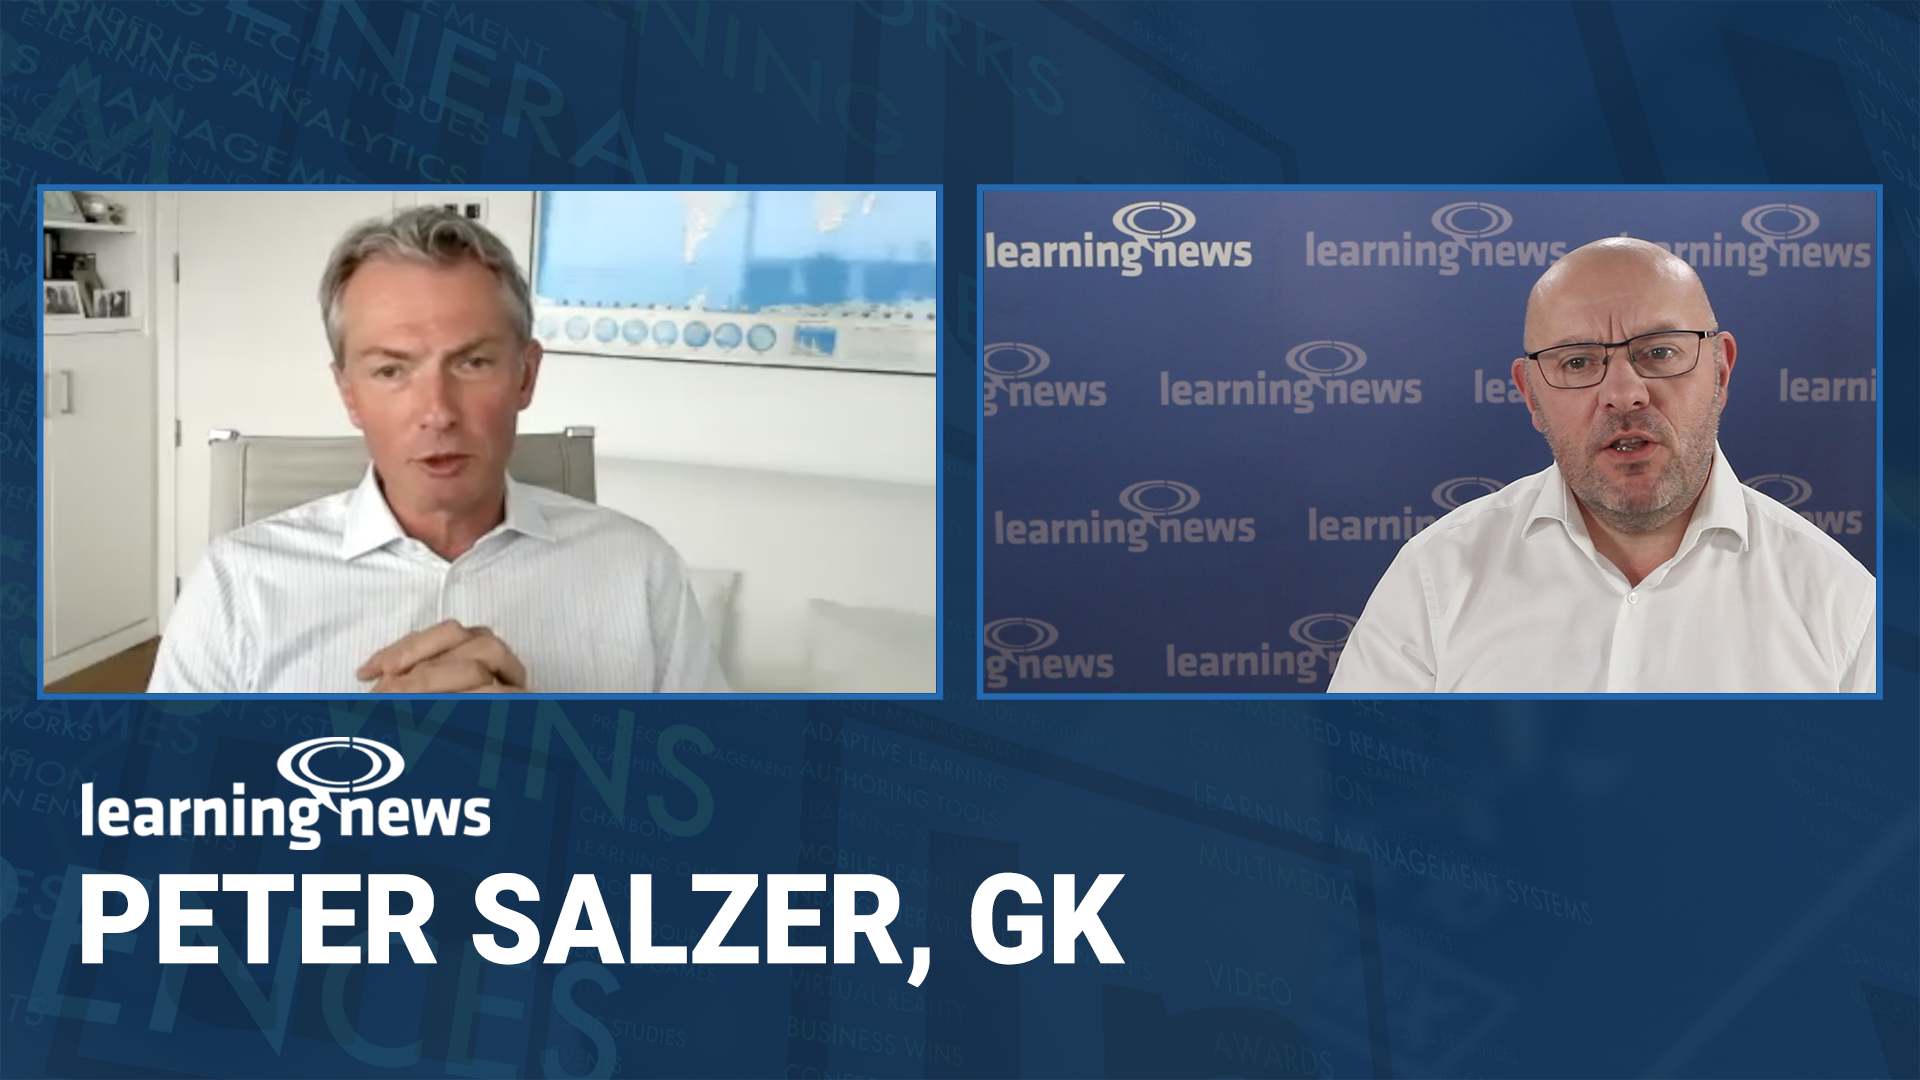 Peter Salzer, Global Knowledge, in discussion with Learning News